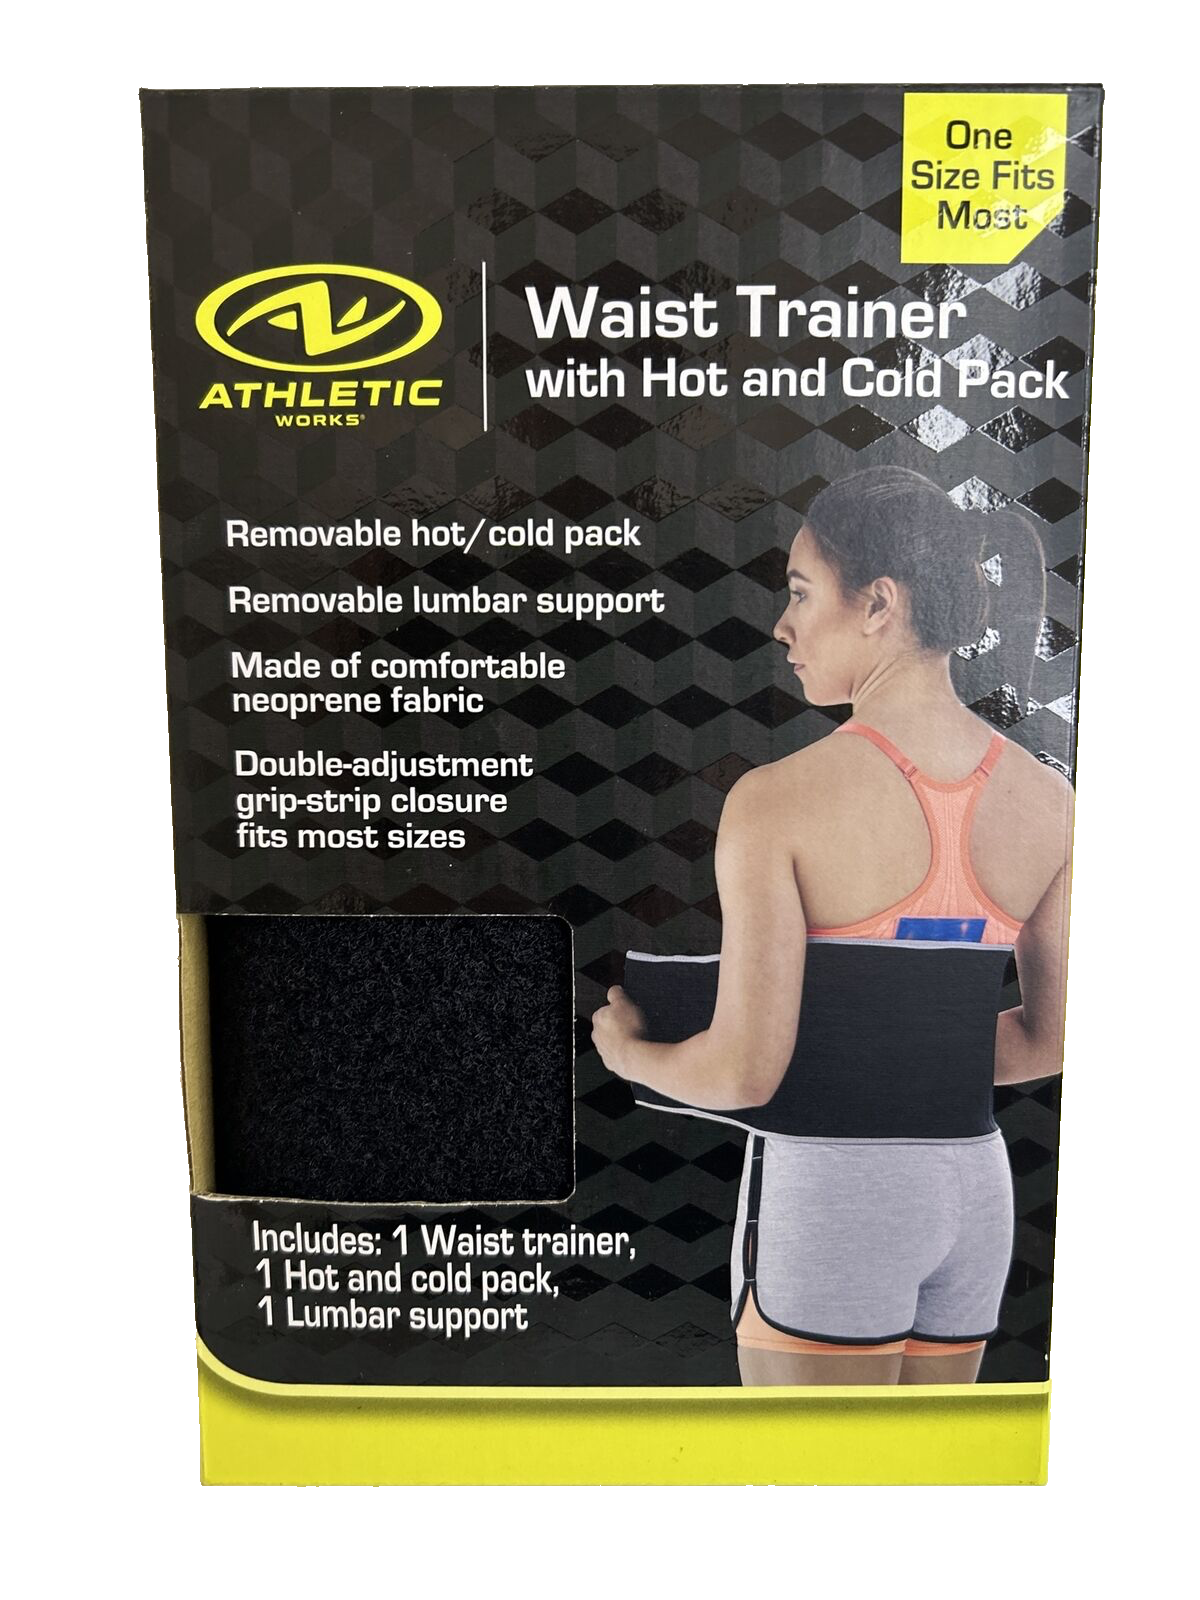 Athletic Works One Size Waist Trainer With Hot And Cold Pack Lumbar Support-NEW! - $1,803.34